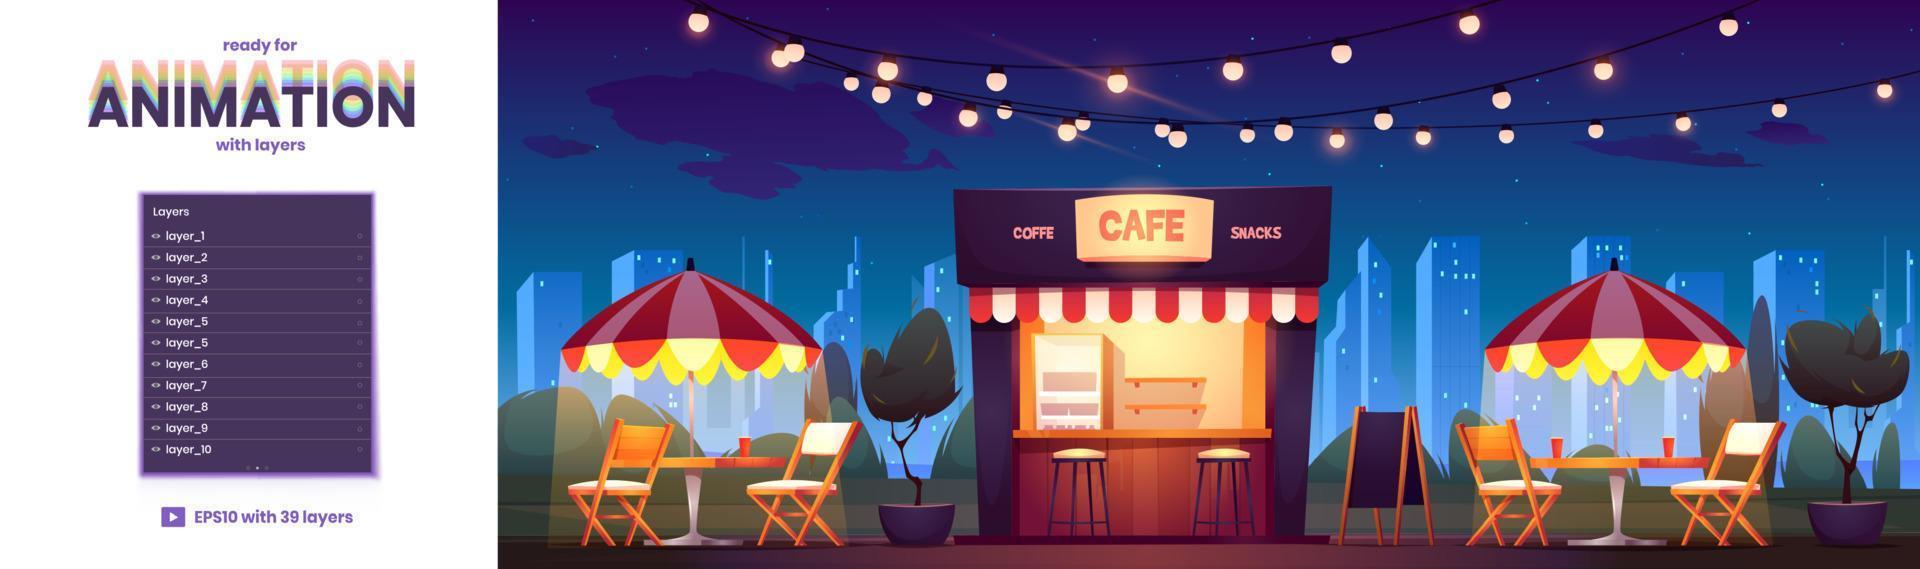 Street cafe at night cityscape background, layers vector